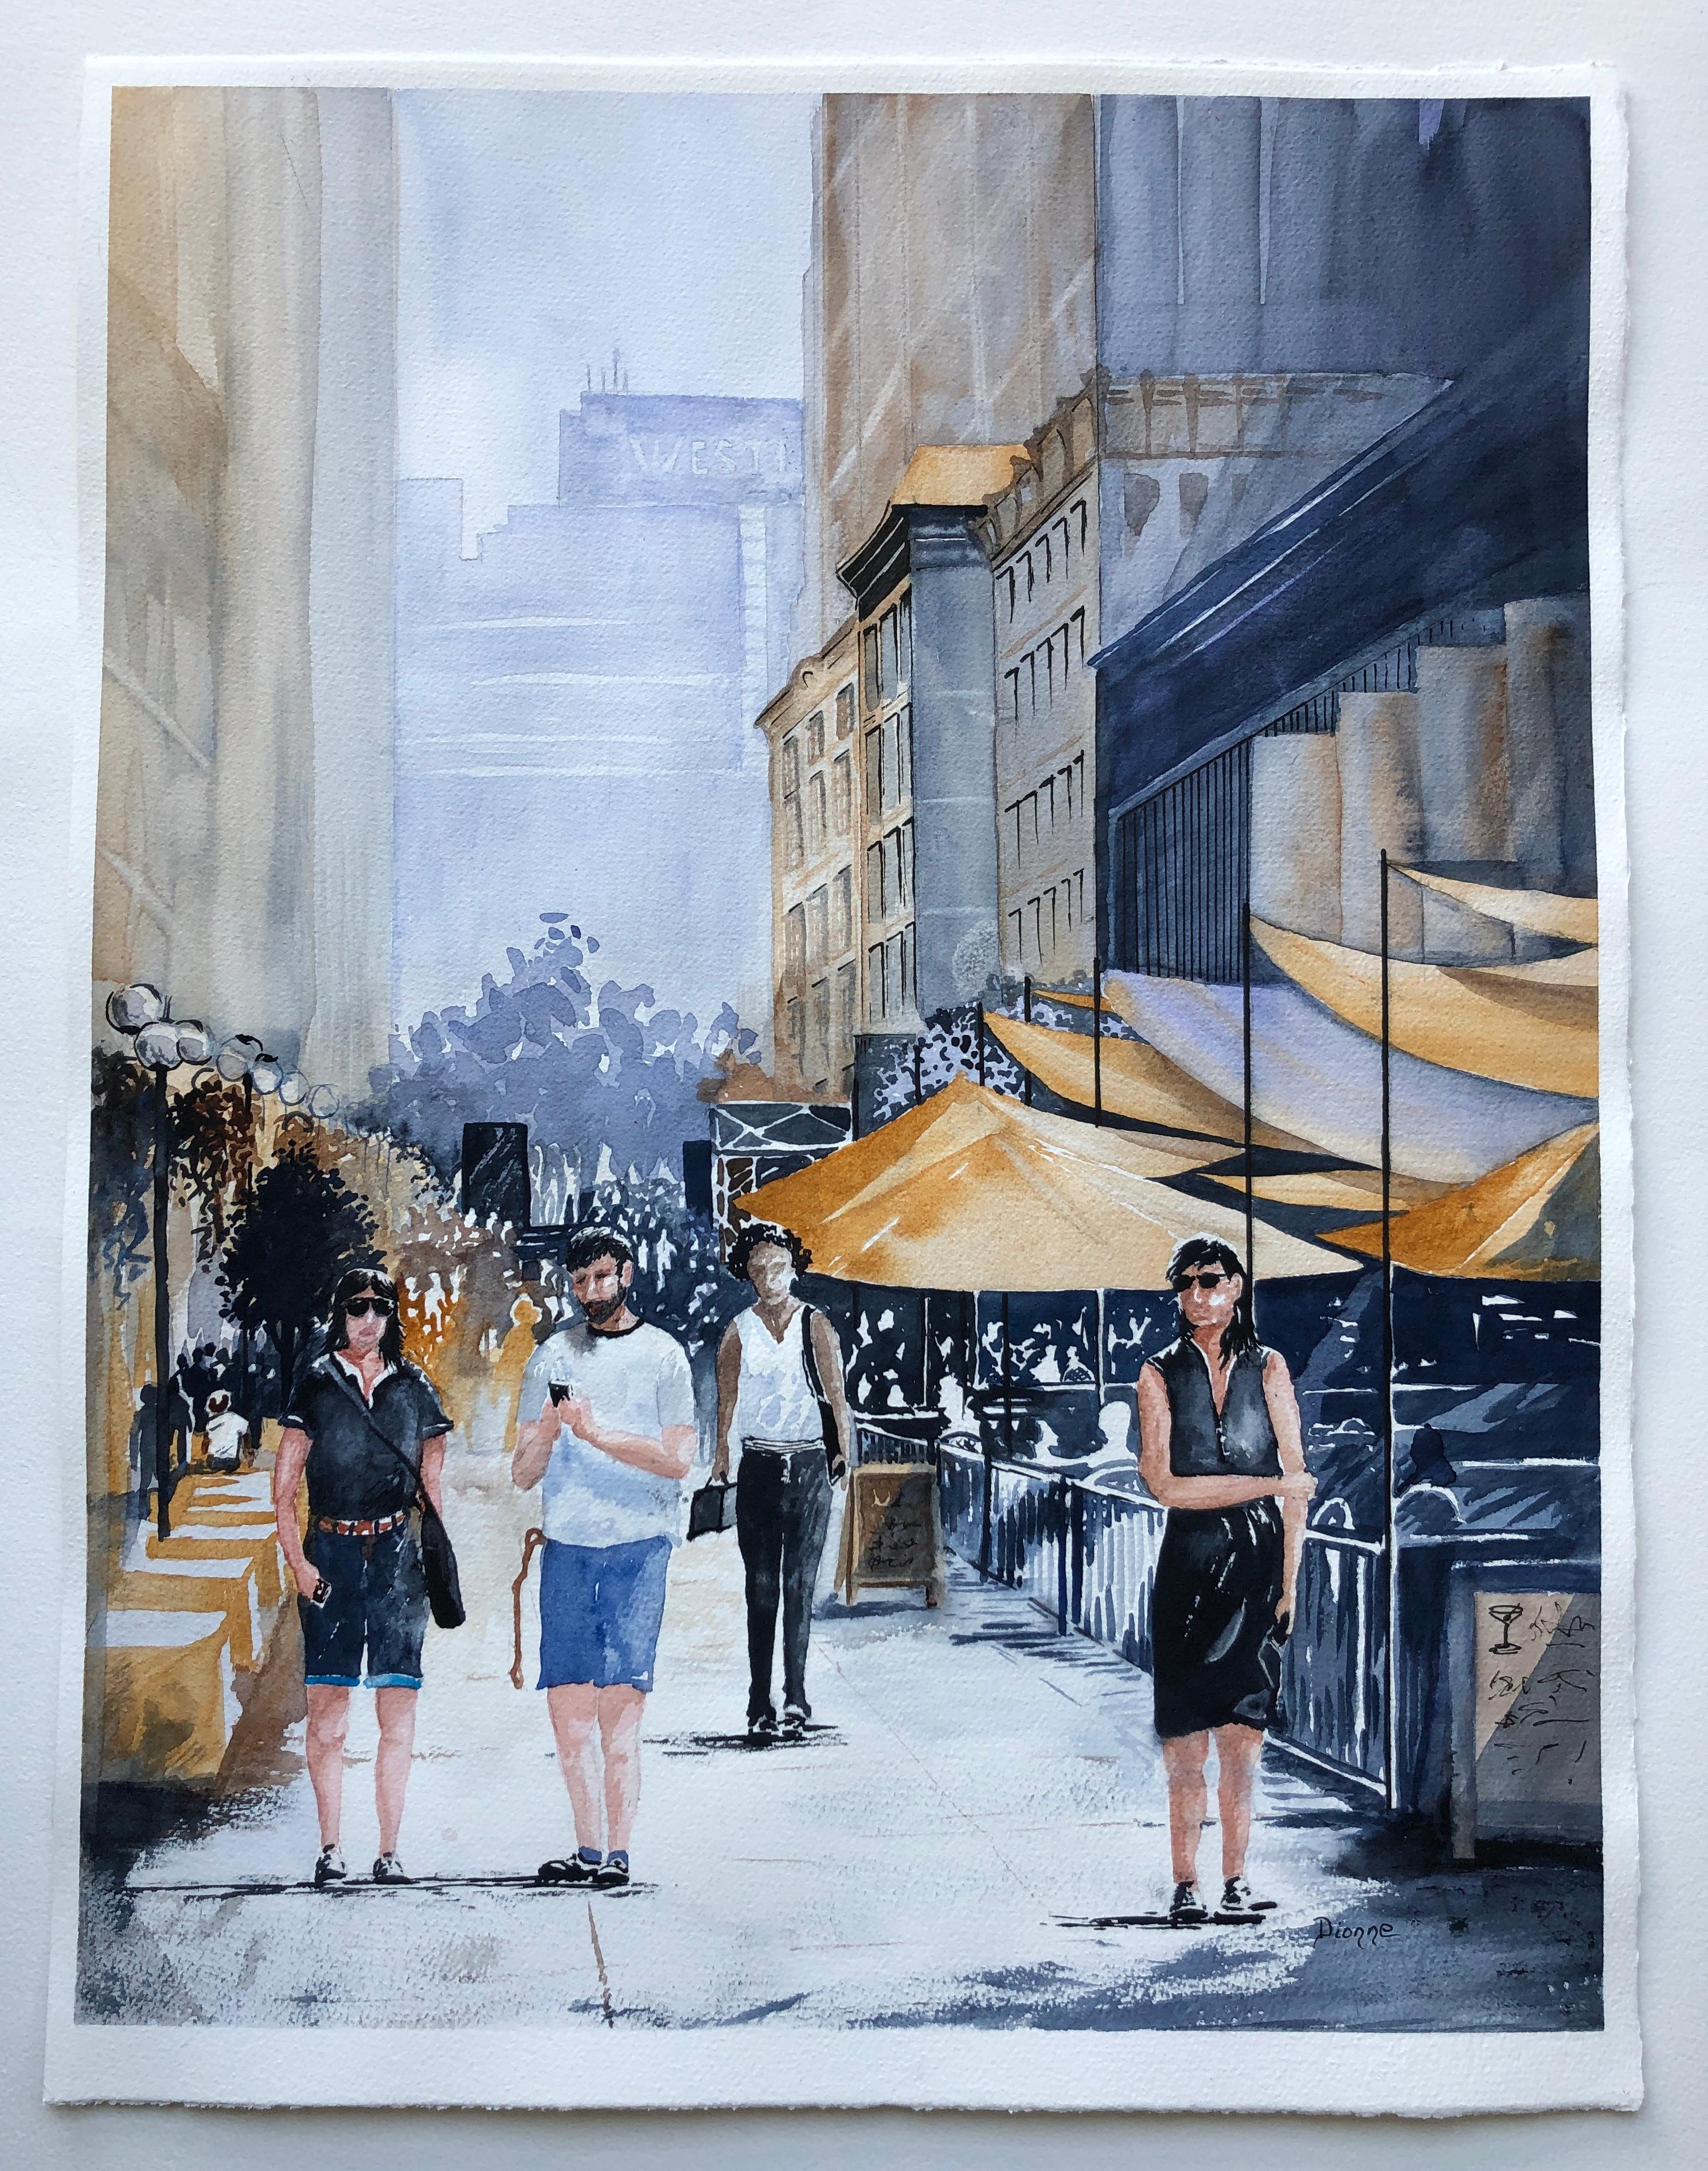 Lunch on Sparks, Original Painting - Art by Maurice Dionne